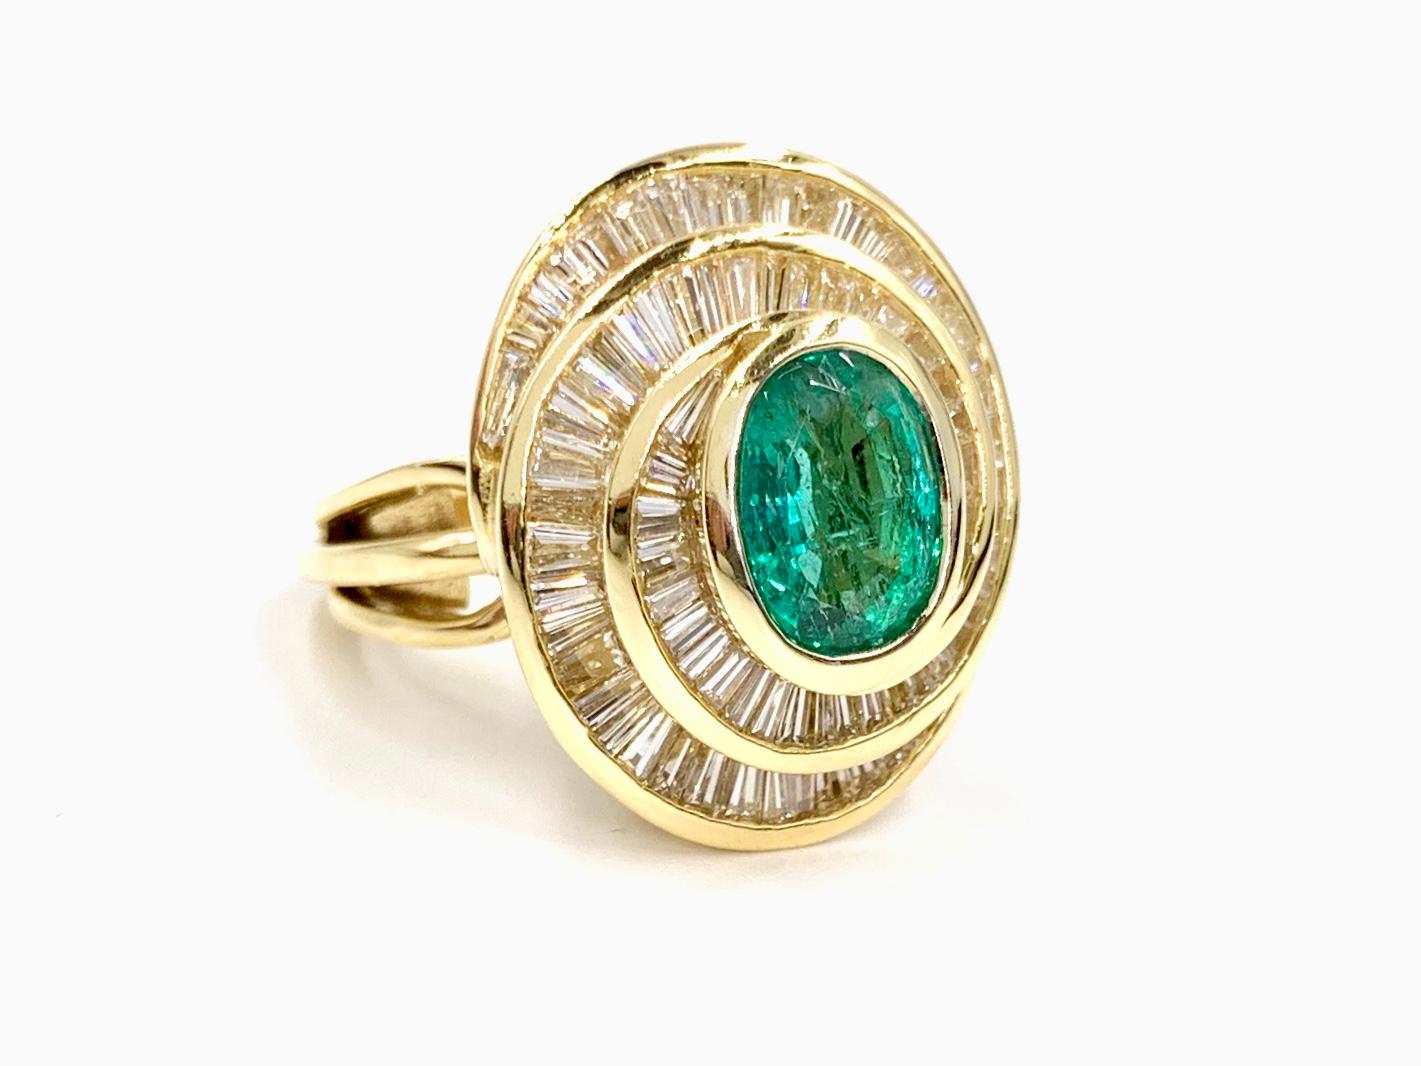 An extraordinary find. This 18 karat yellow gold large cocktail ring features a unique swirl design with expertly cut and set channel set baguette diamonds showcasing a substantial oval vivid emerald center. Oval emerald weighs approximately 2